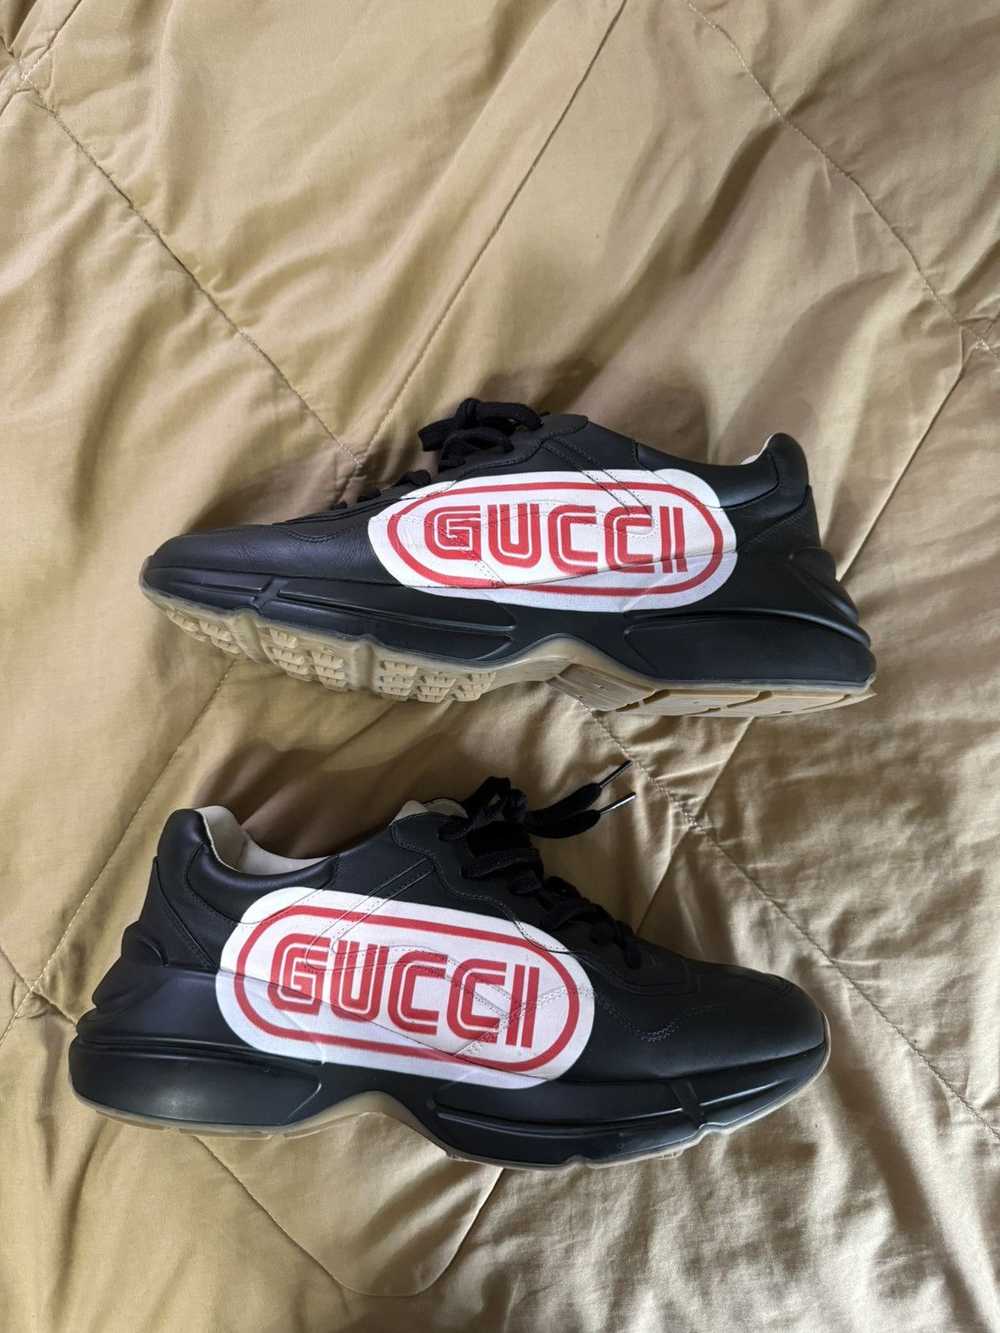 Gucci Gucci Rhyton Leather Trainers - image 2